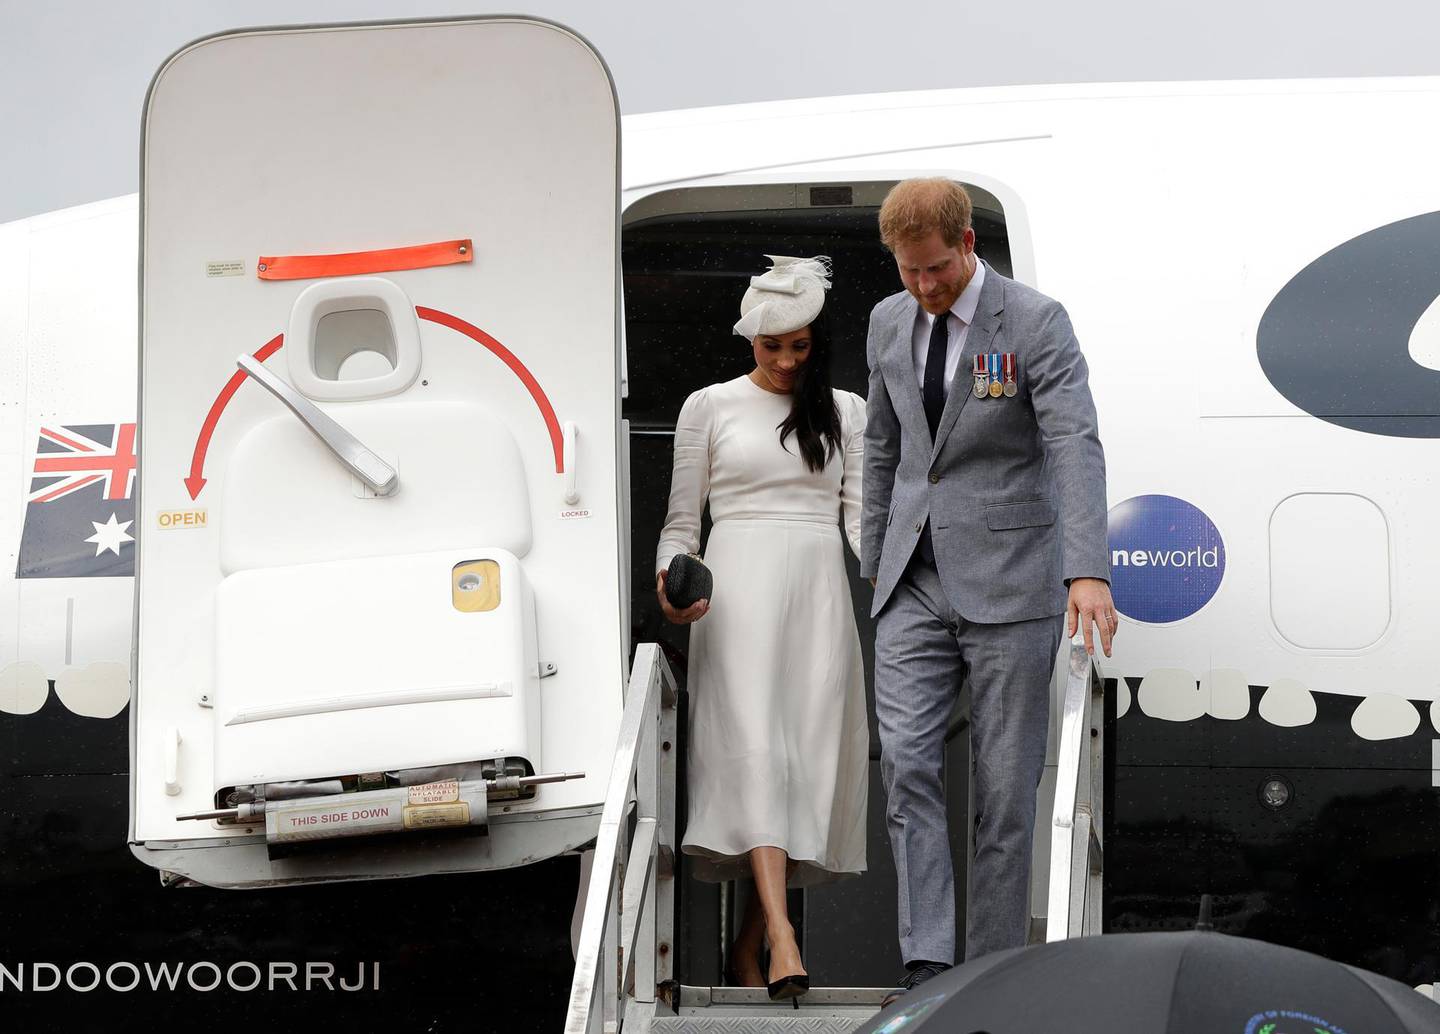 SUVA, FIJI - OCTOBER 23:  Prince Harry, Duke of Sussex and Meghan, Duchess of Sussex disembark from their plane on their arrival in Suva on October 23, 2018 in Suva, Fiji. The Duke and Duchess of Sussex are on their official 16-day Autumn tour visiting cities in Australia, Fiji, Tonga and New Zealand. (Photo by Kirsty Wigglesworth - Pool/Getty Images)